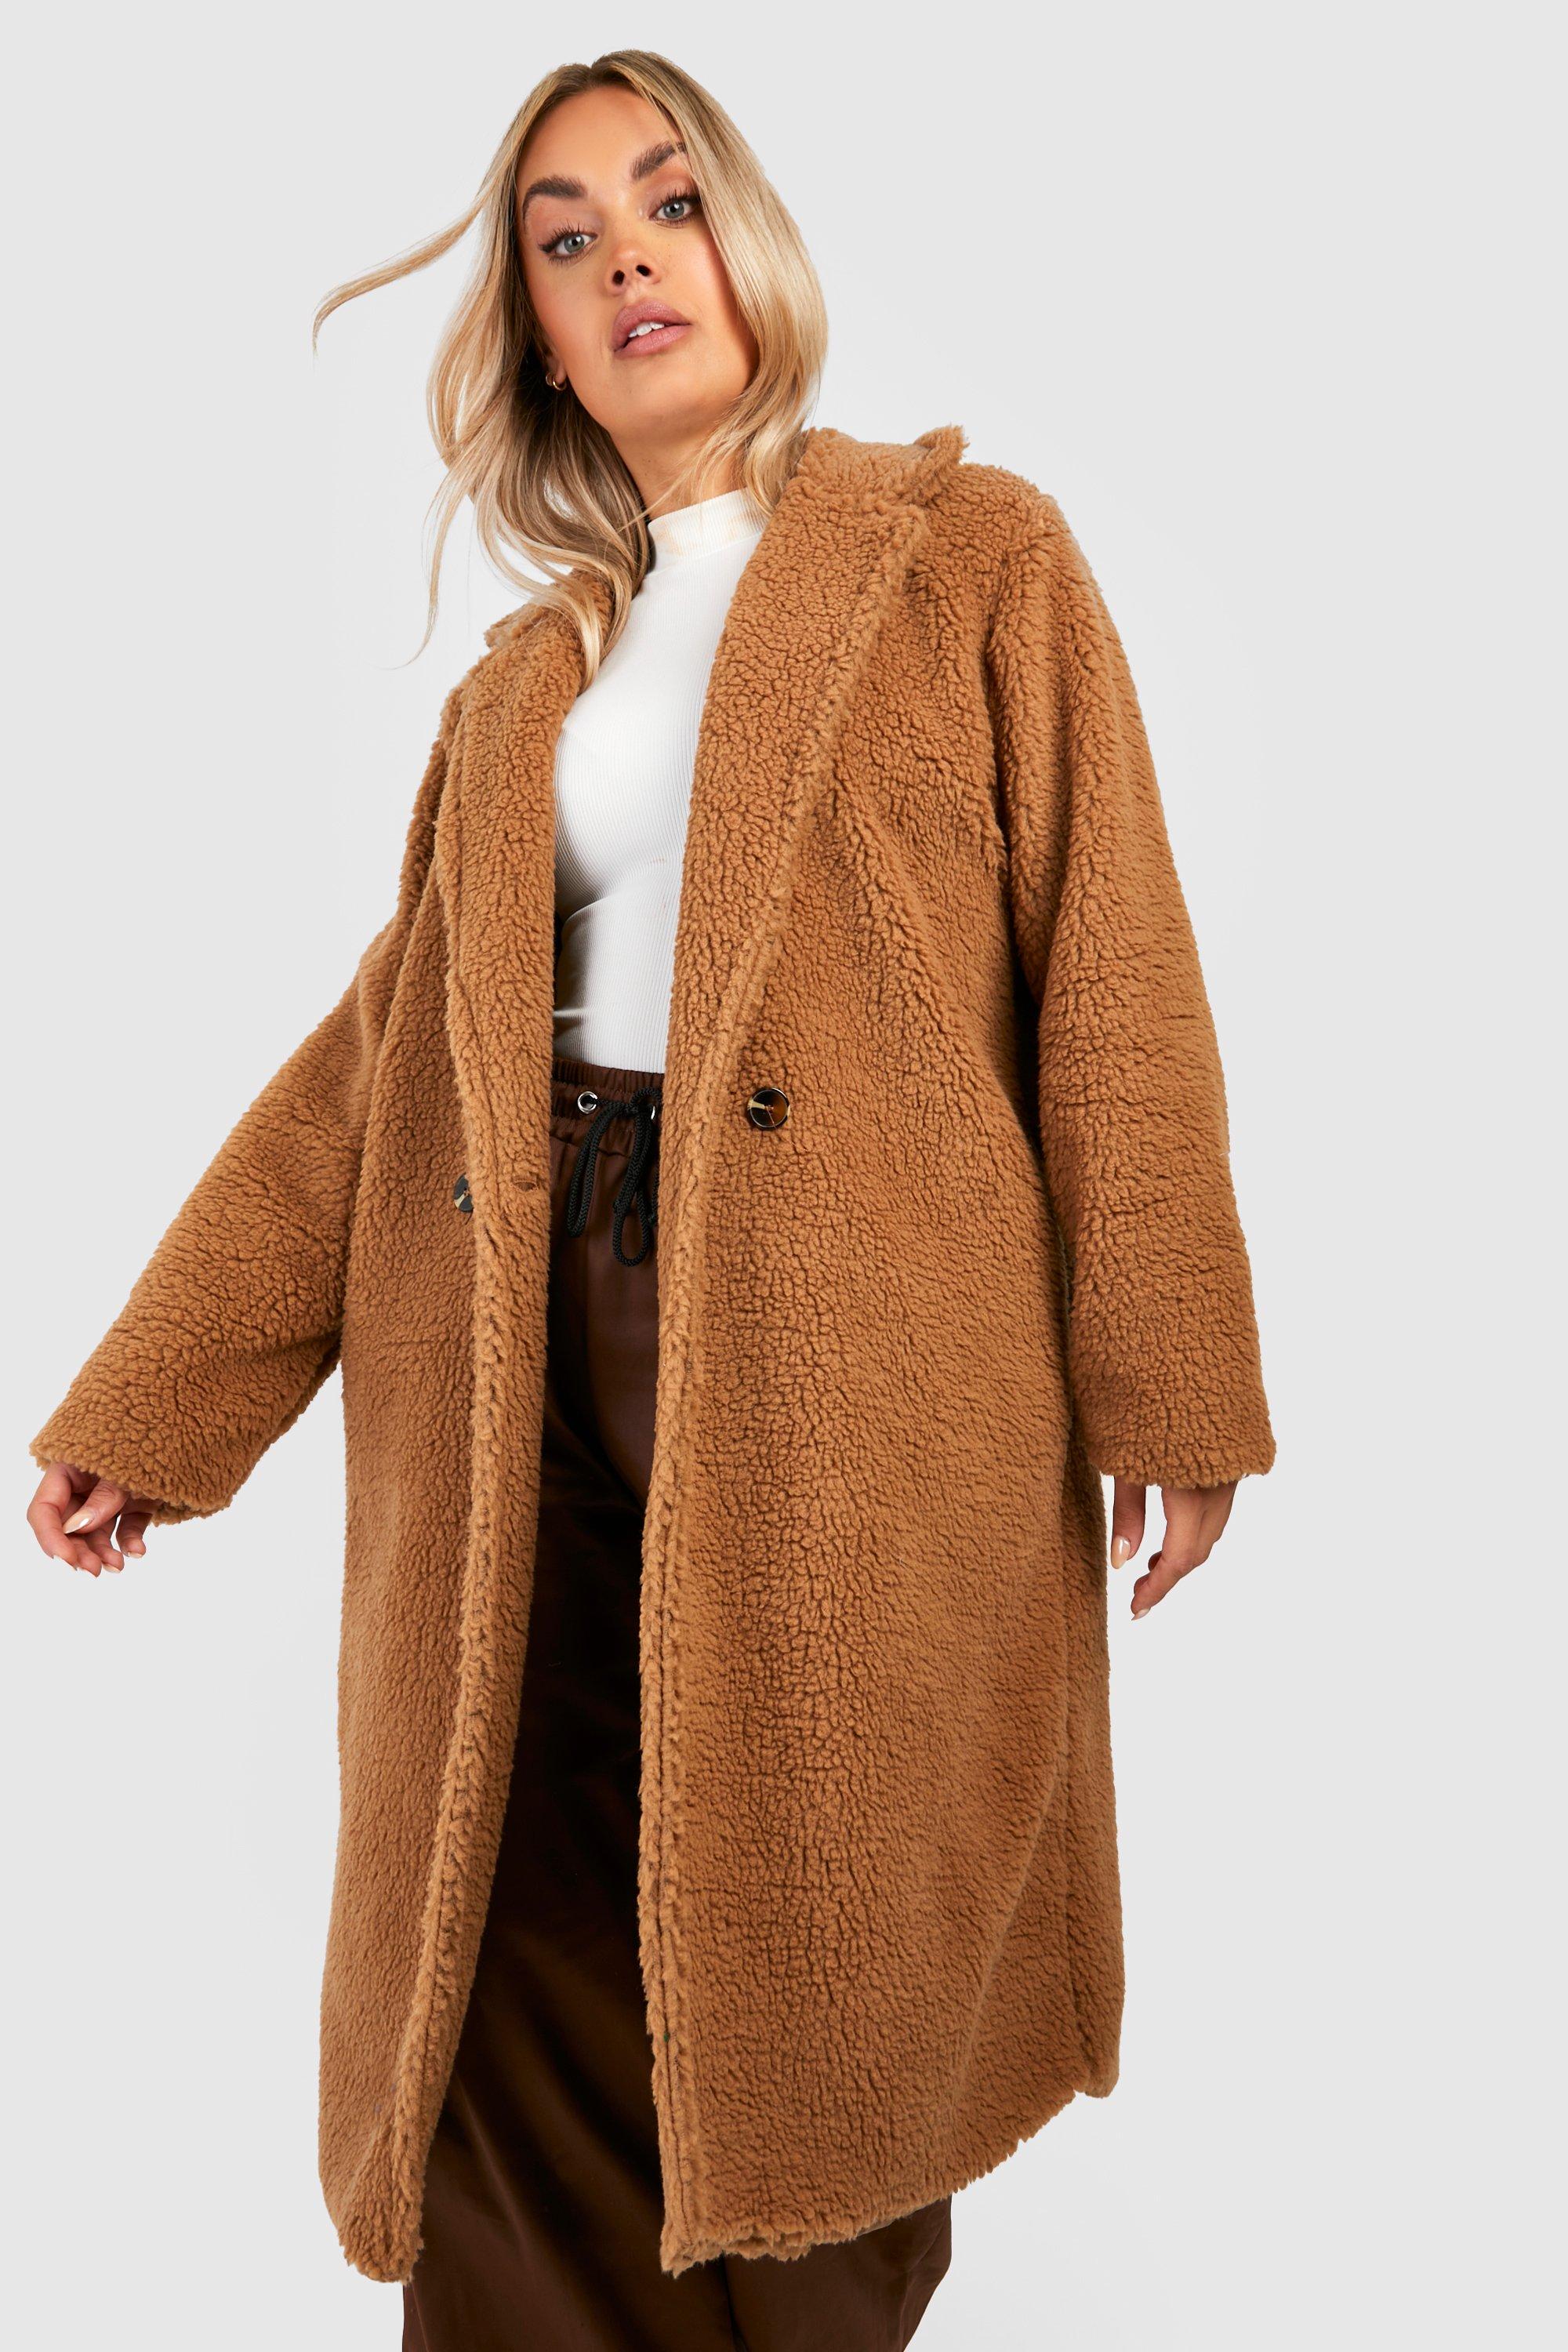 boohoo Double Breasted Faux Fur Coat - Brown - Size 10